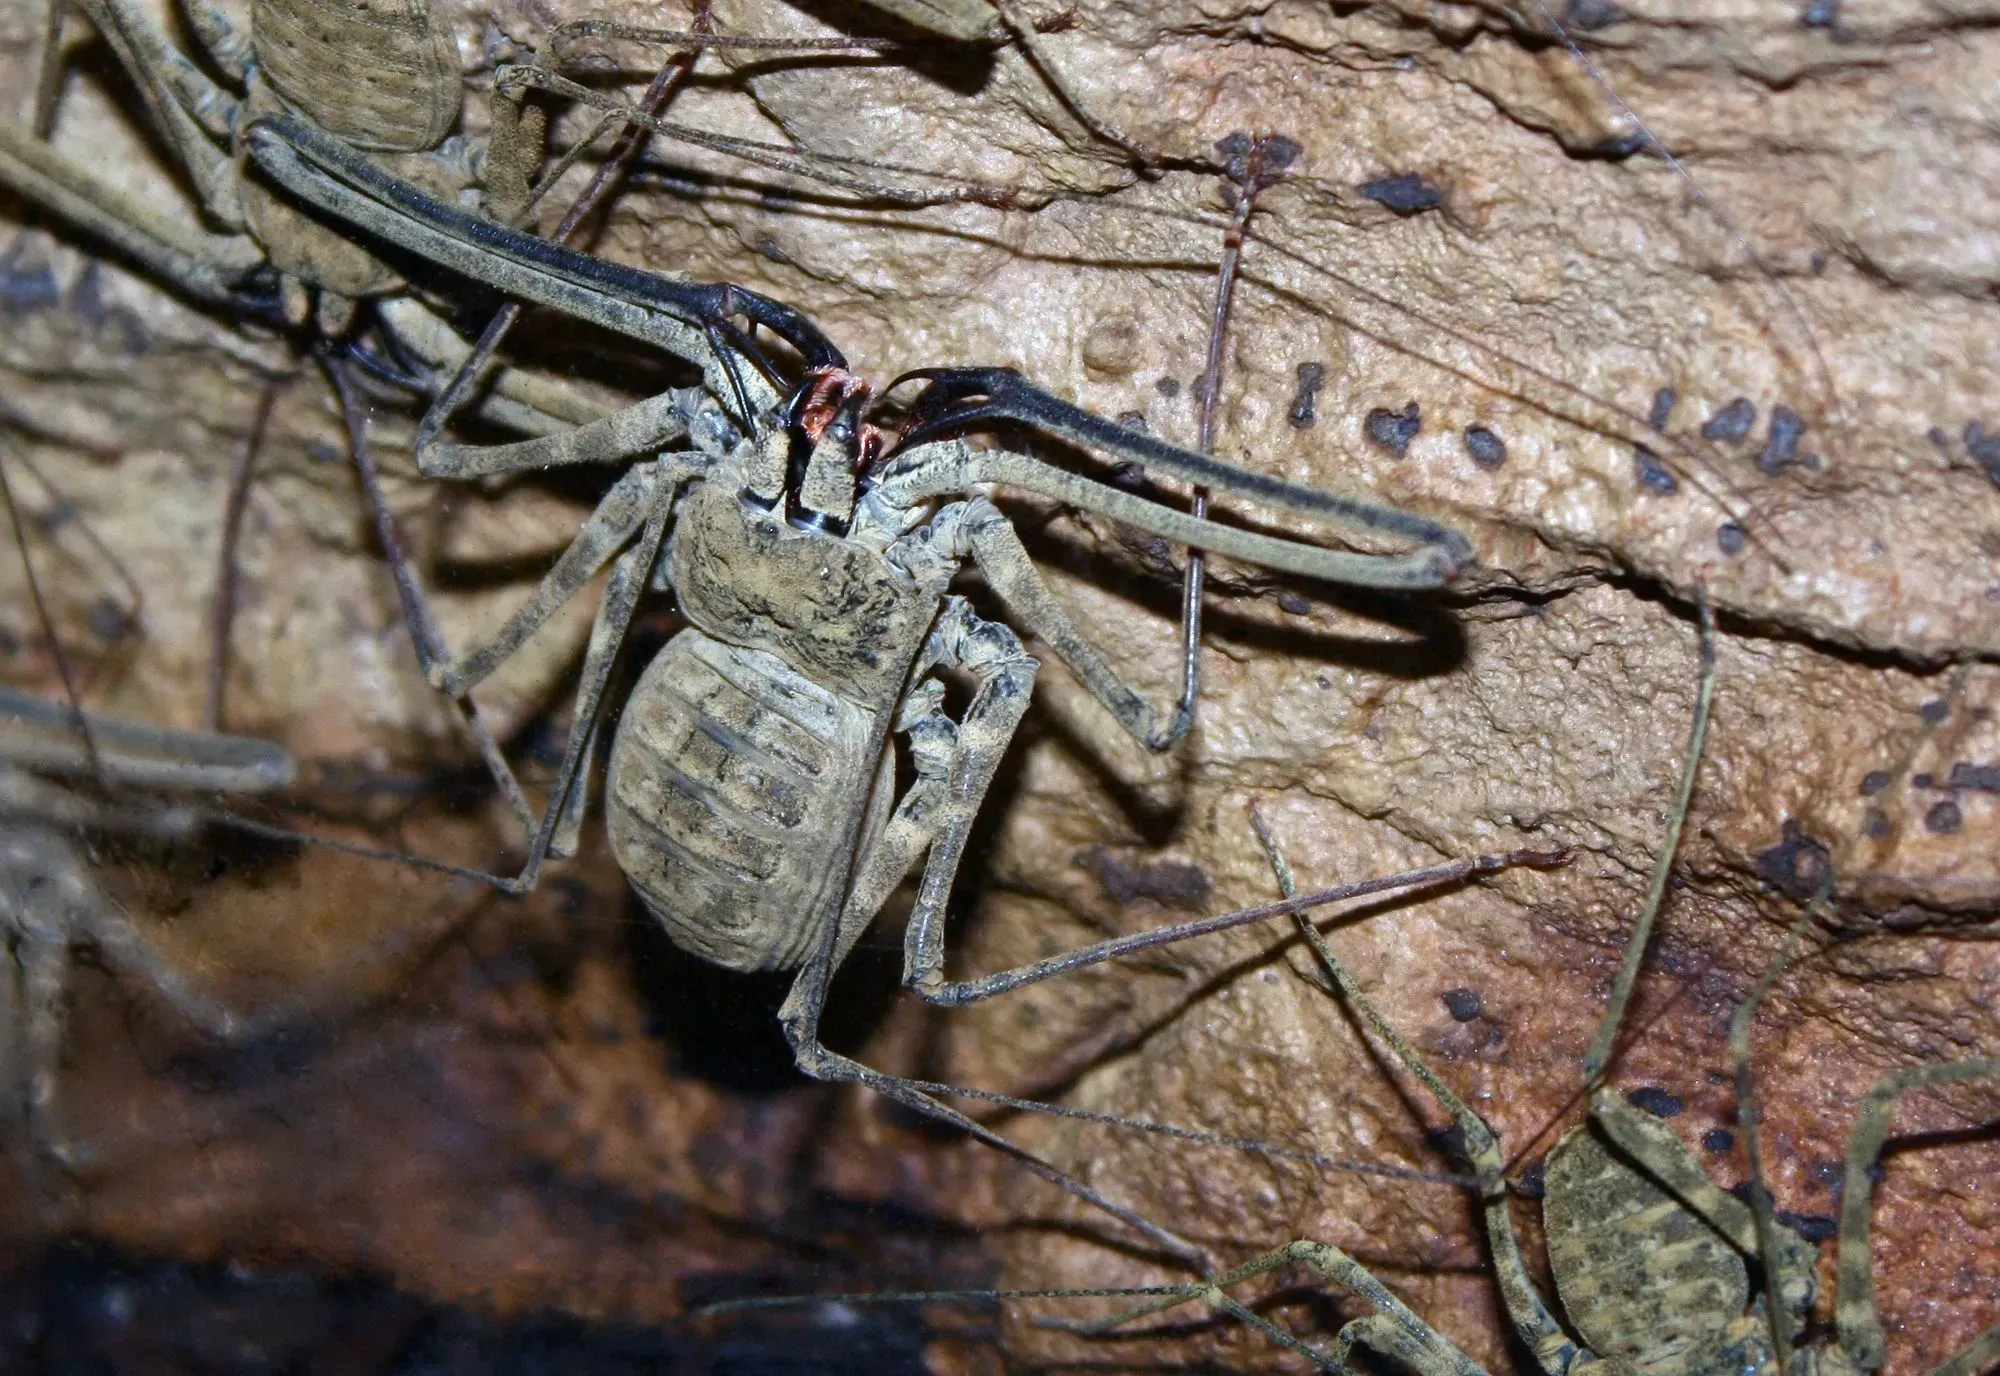 Amblypygids are arachnids that are also known as tailless whip scorpions or whip spiders.